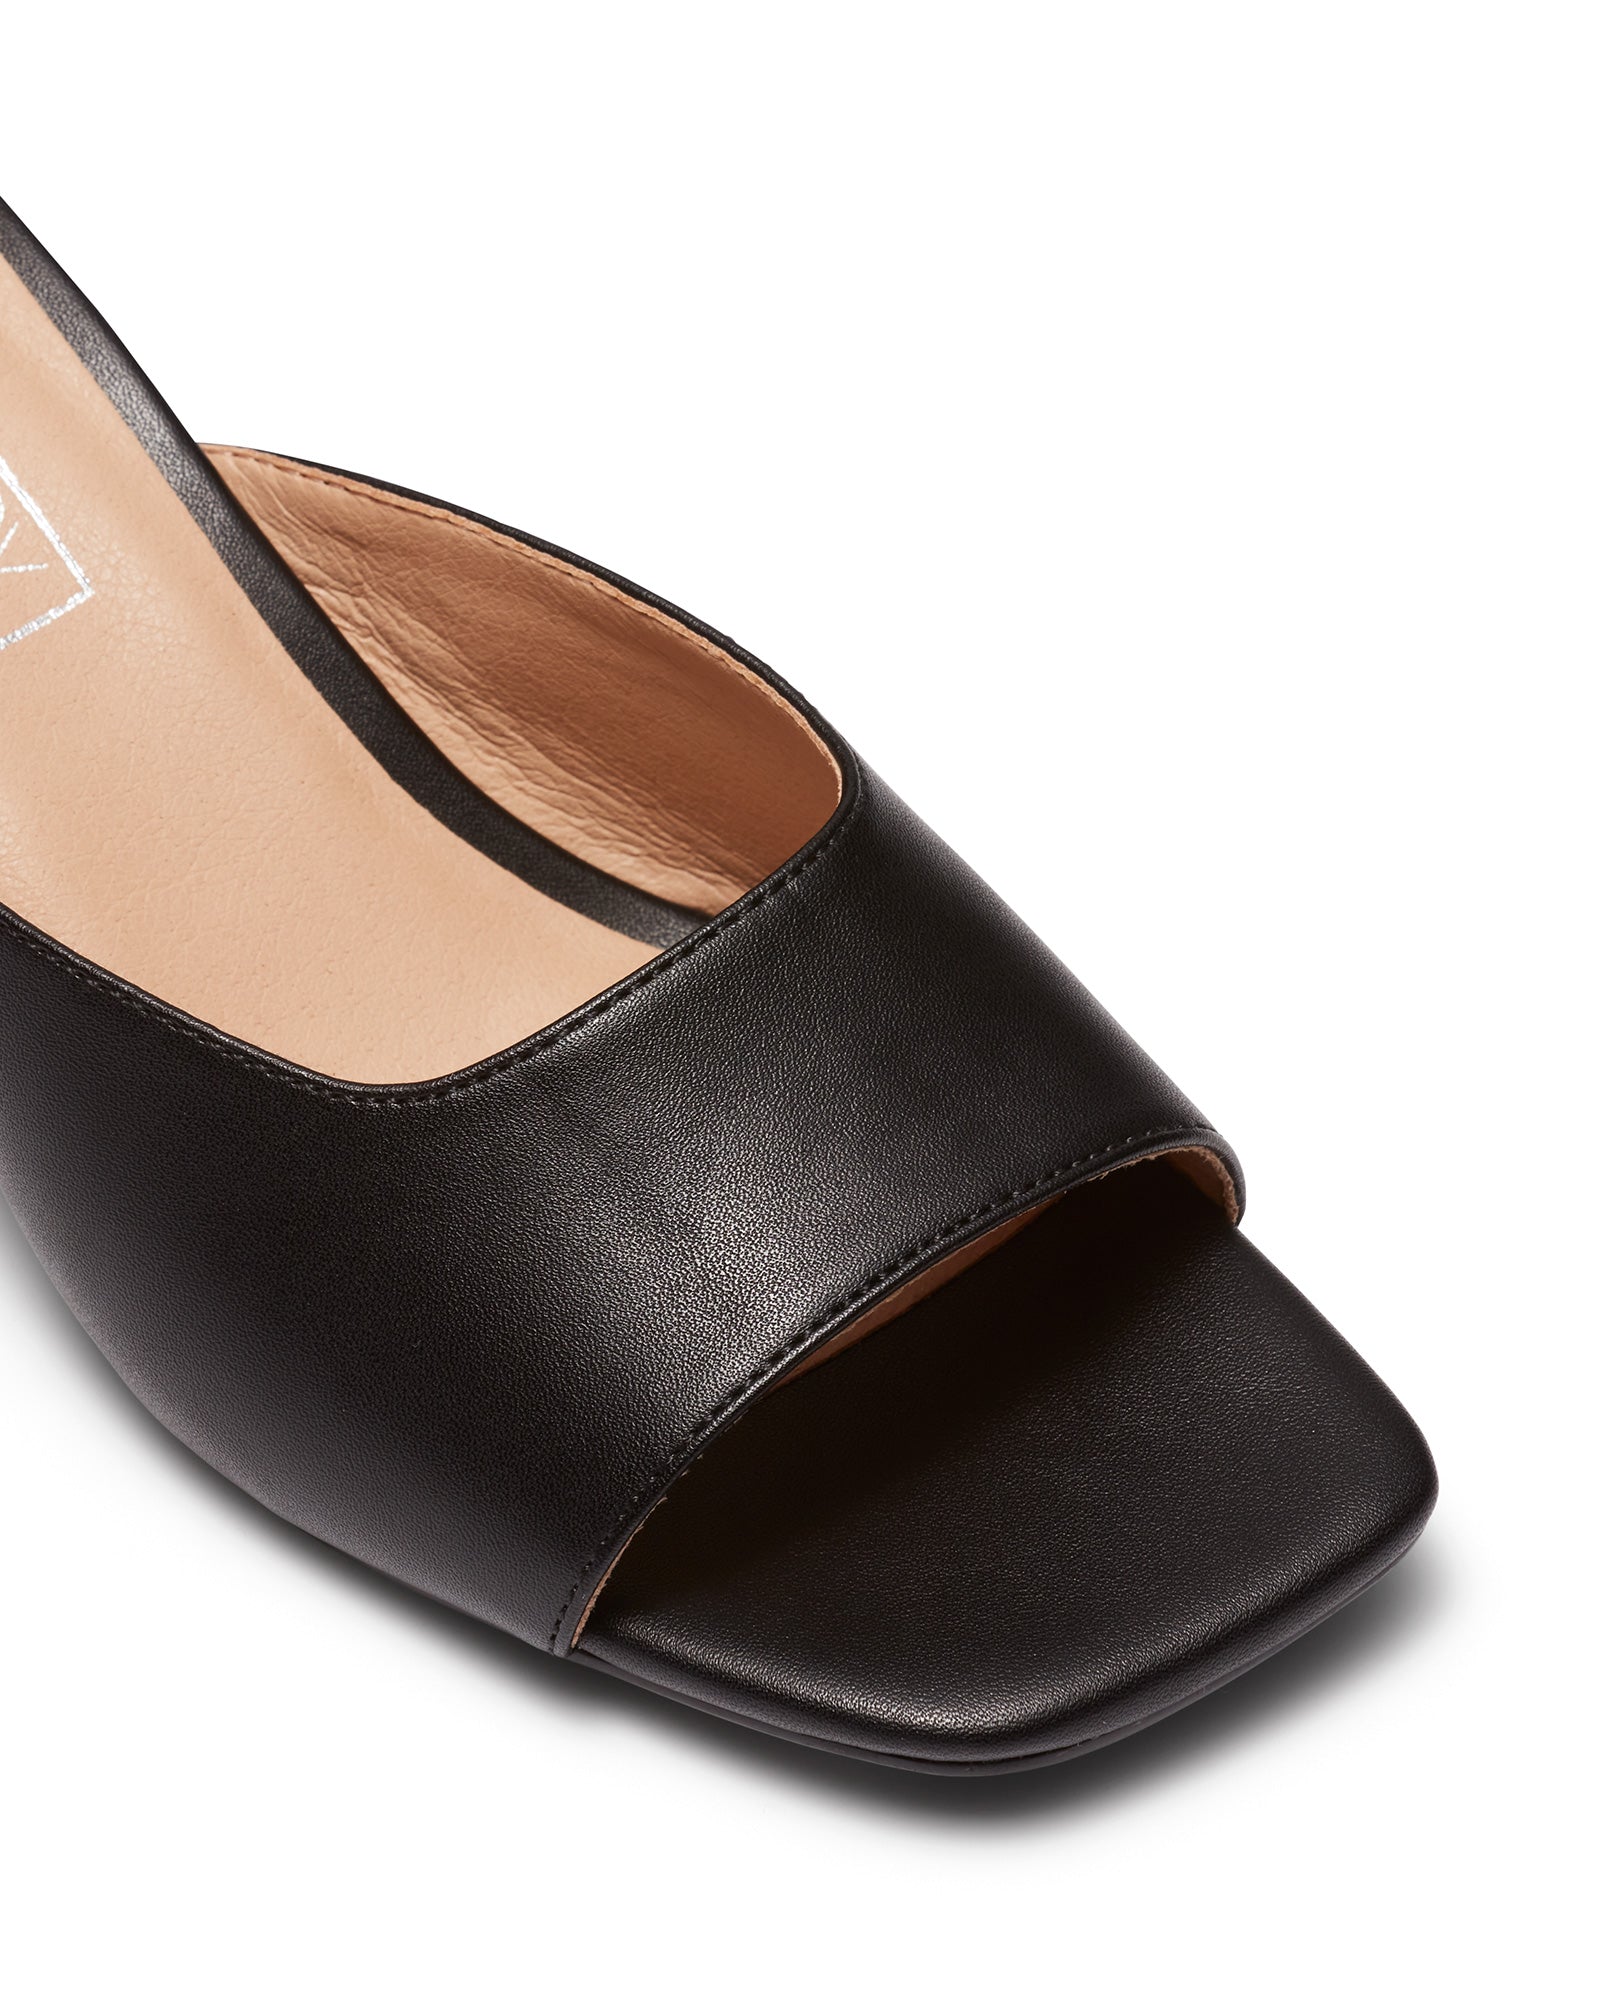 Therapy Shoes Piper Black | Women's Heels | Sandals | Mules | Square